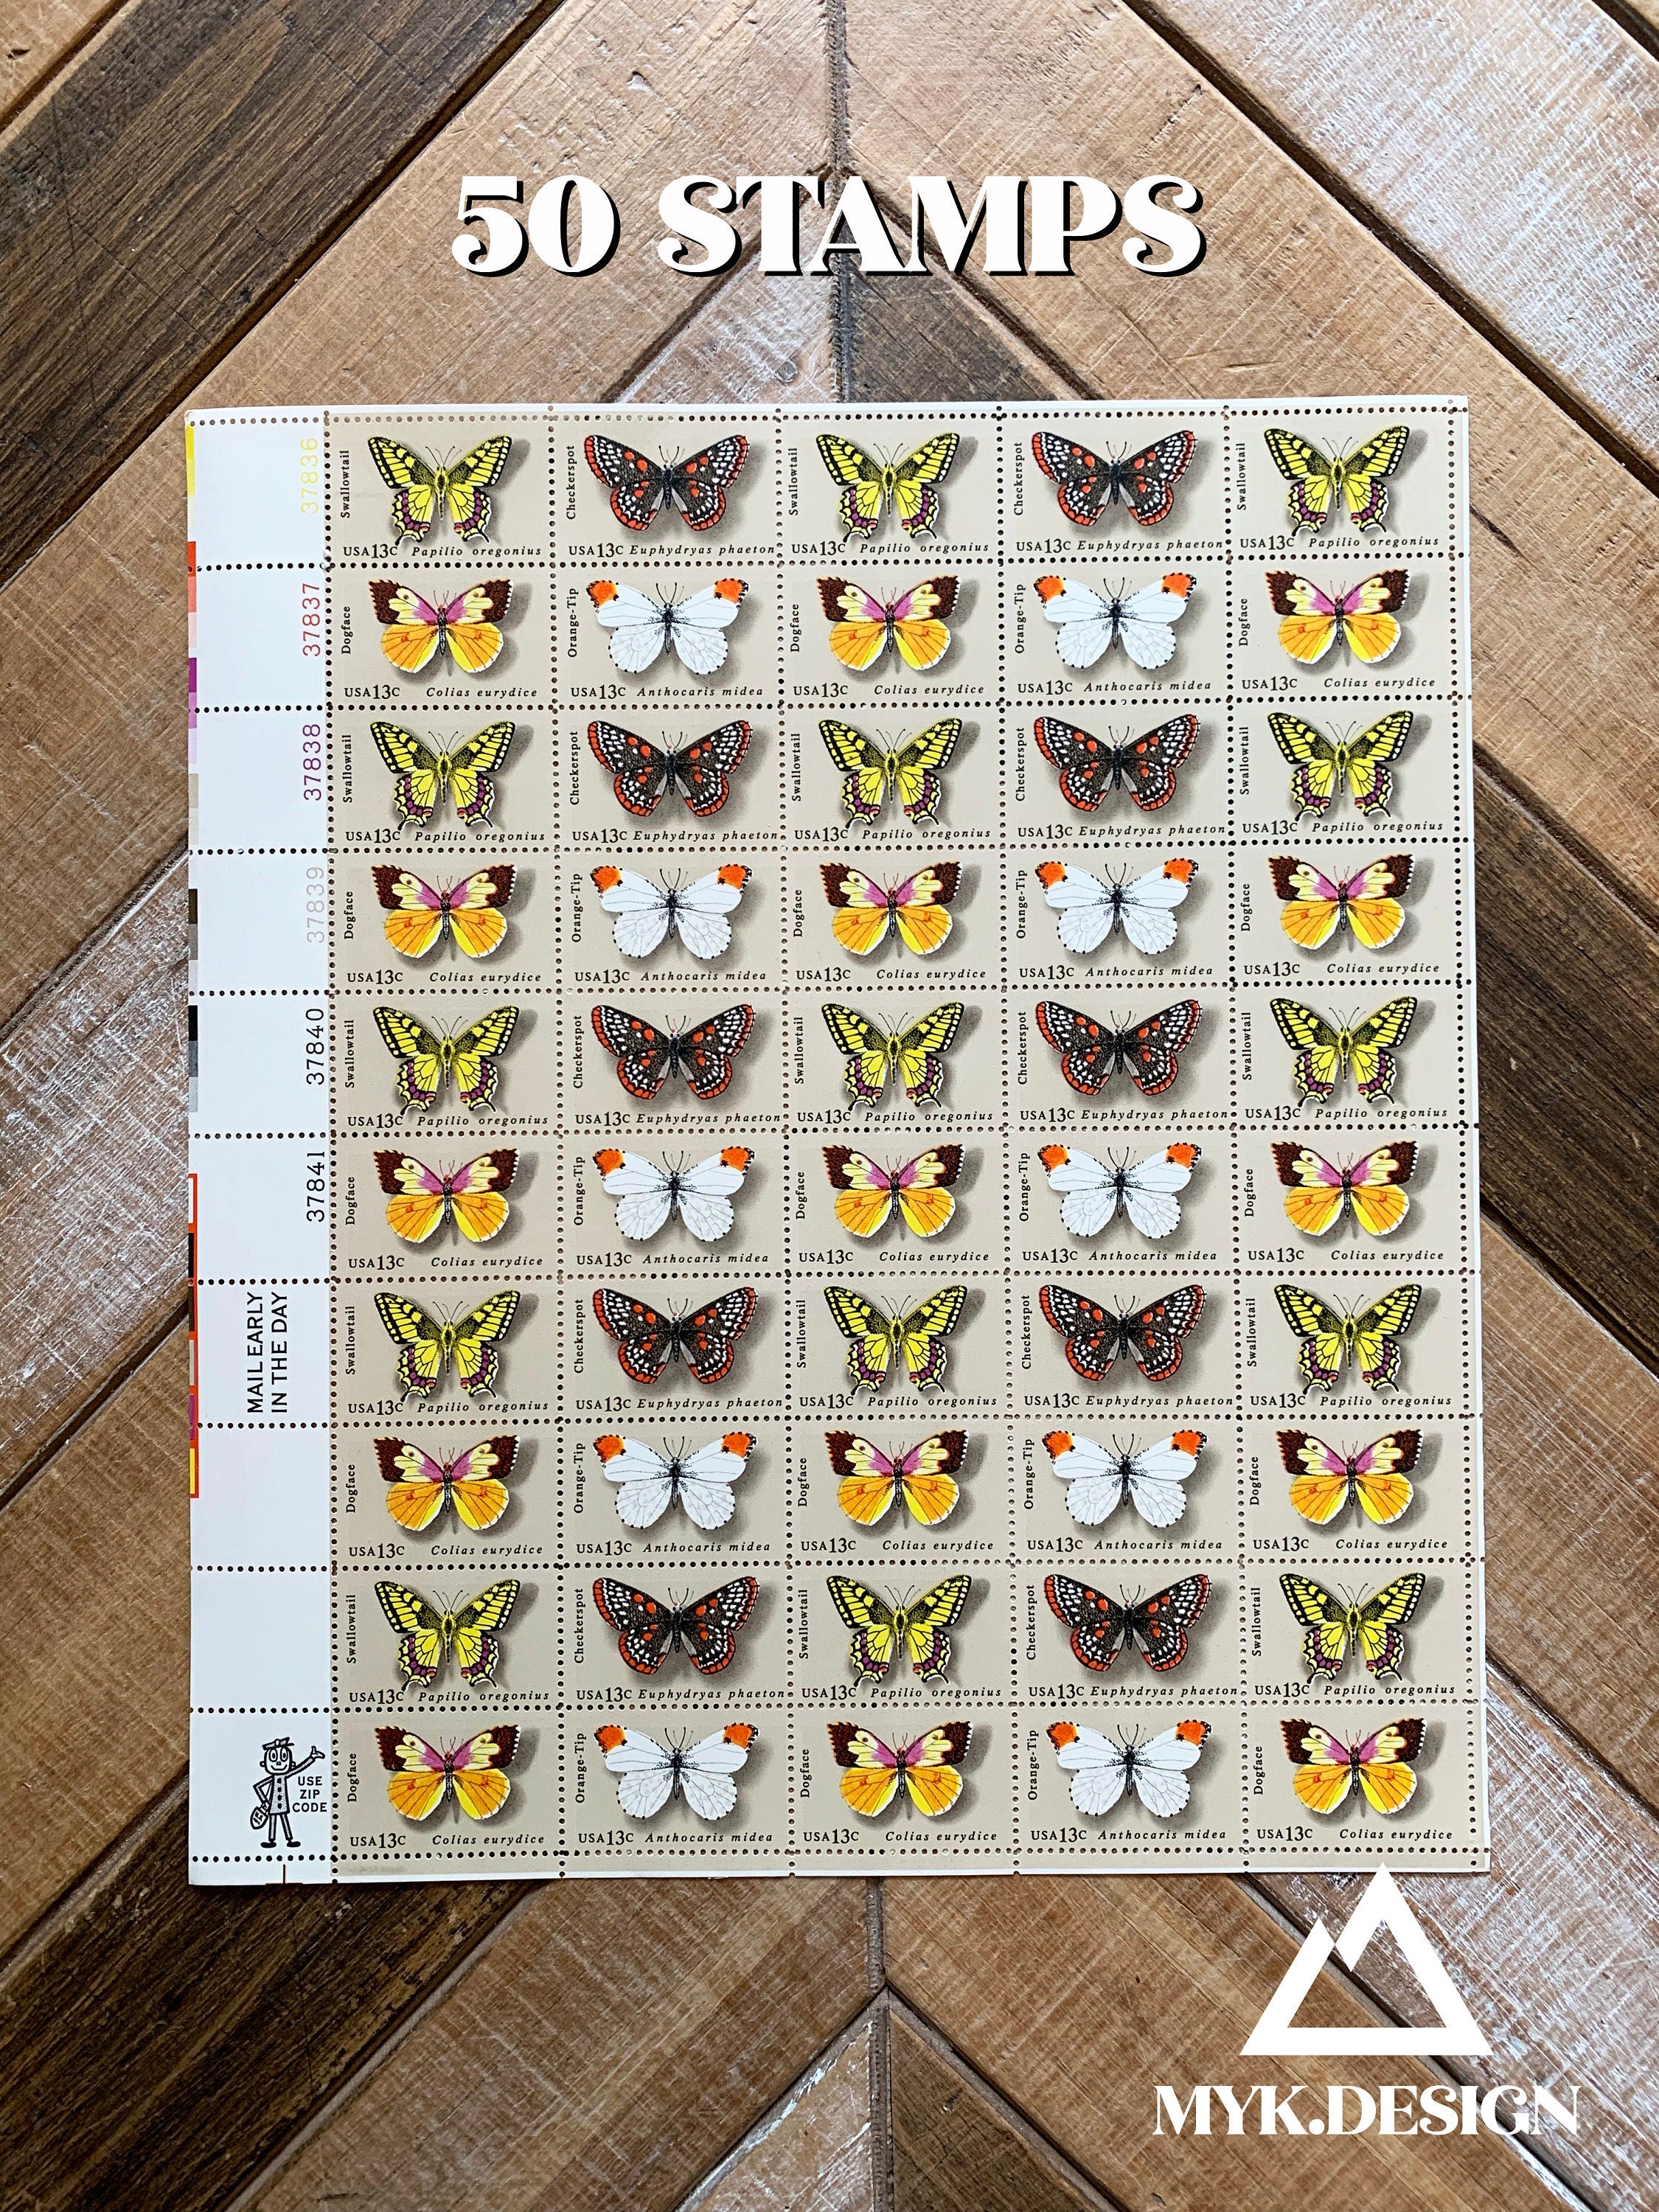 1714 - 1977 13c Butterflies: Dogface - Mystic Stamp Company